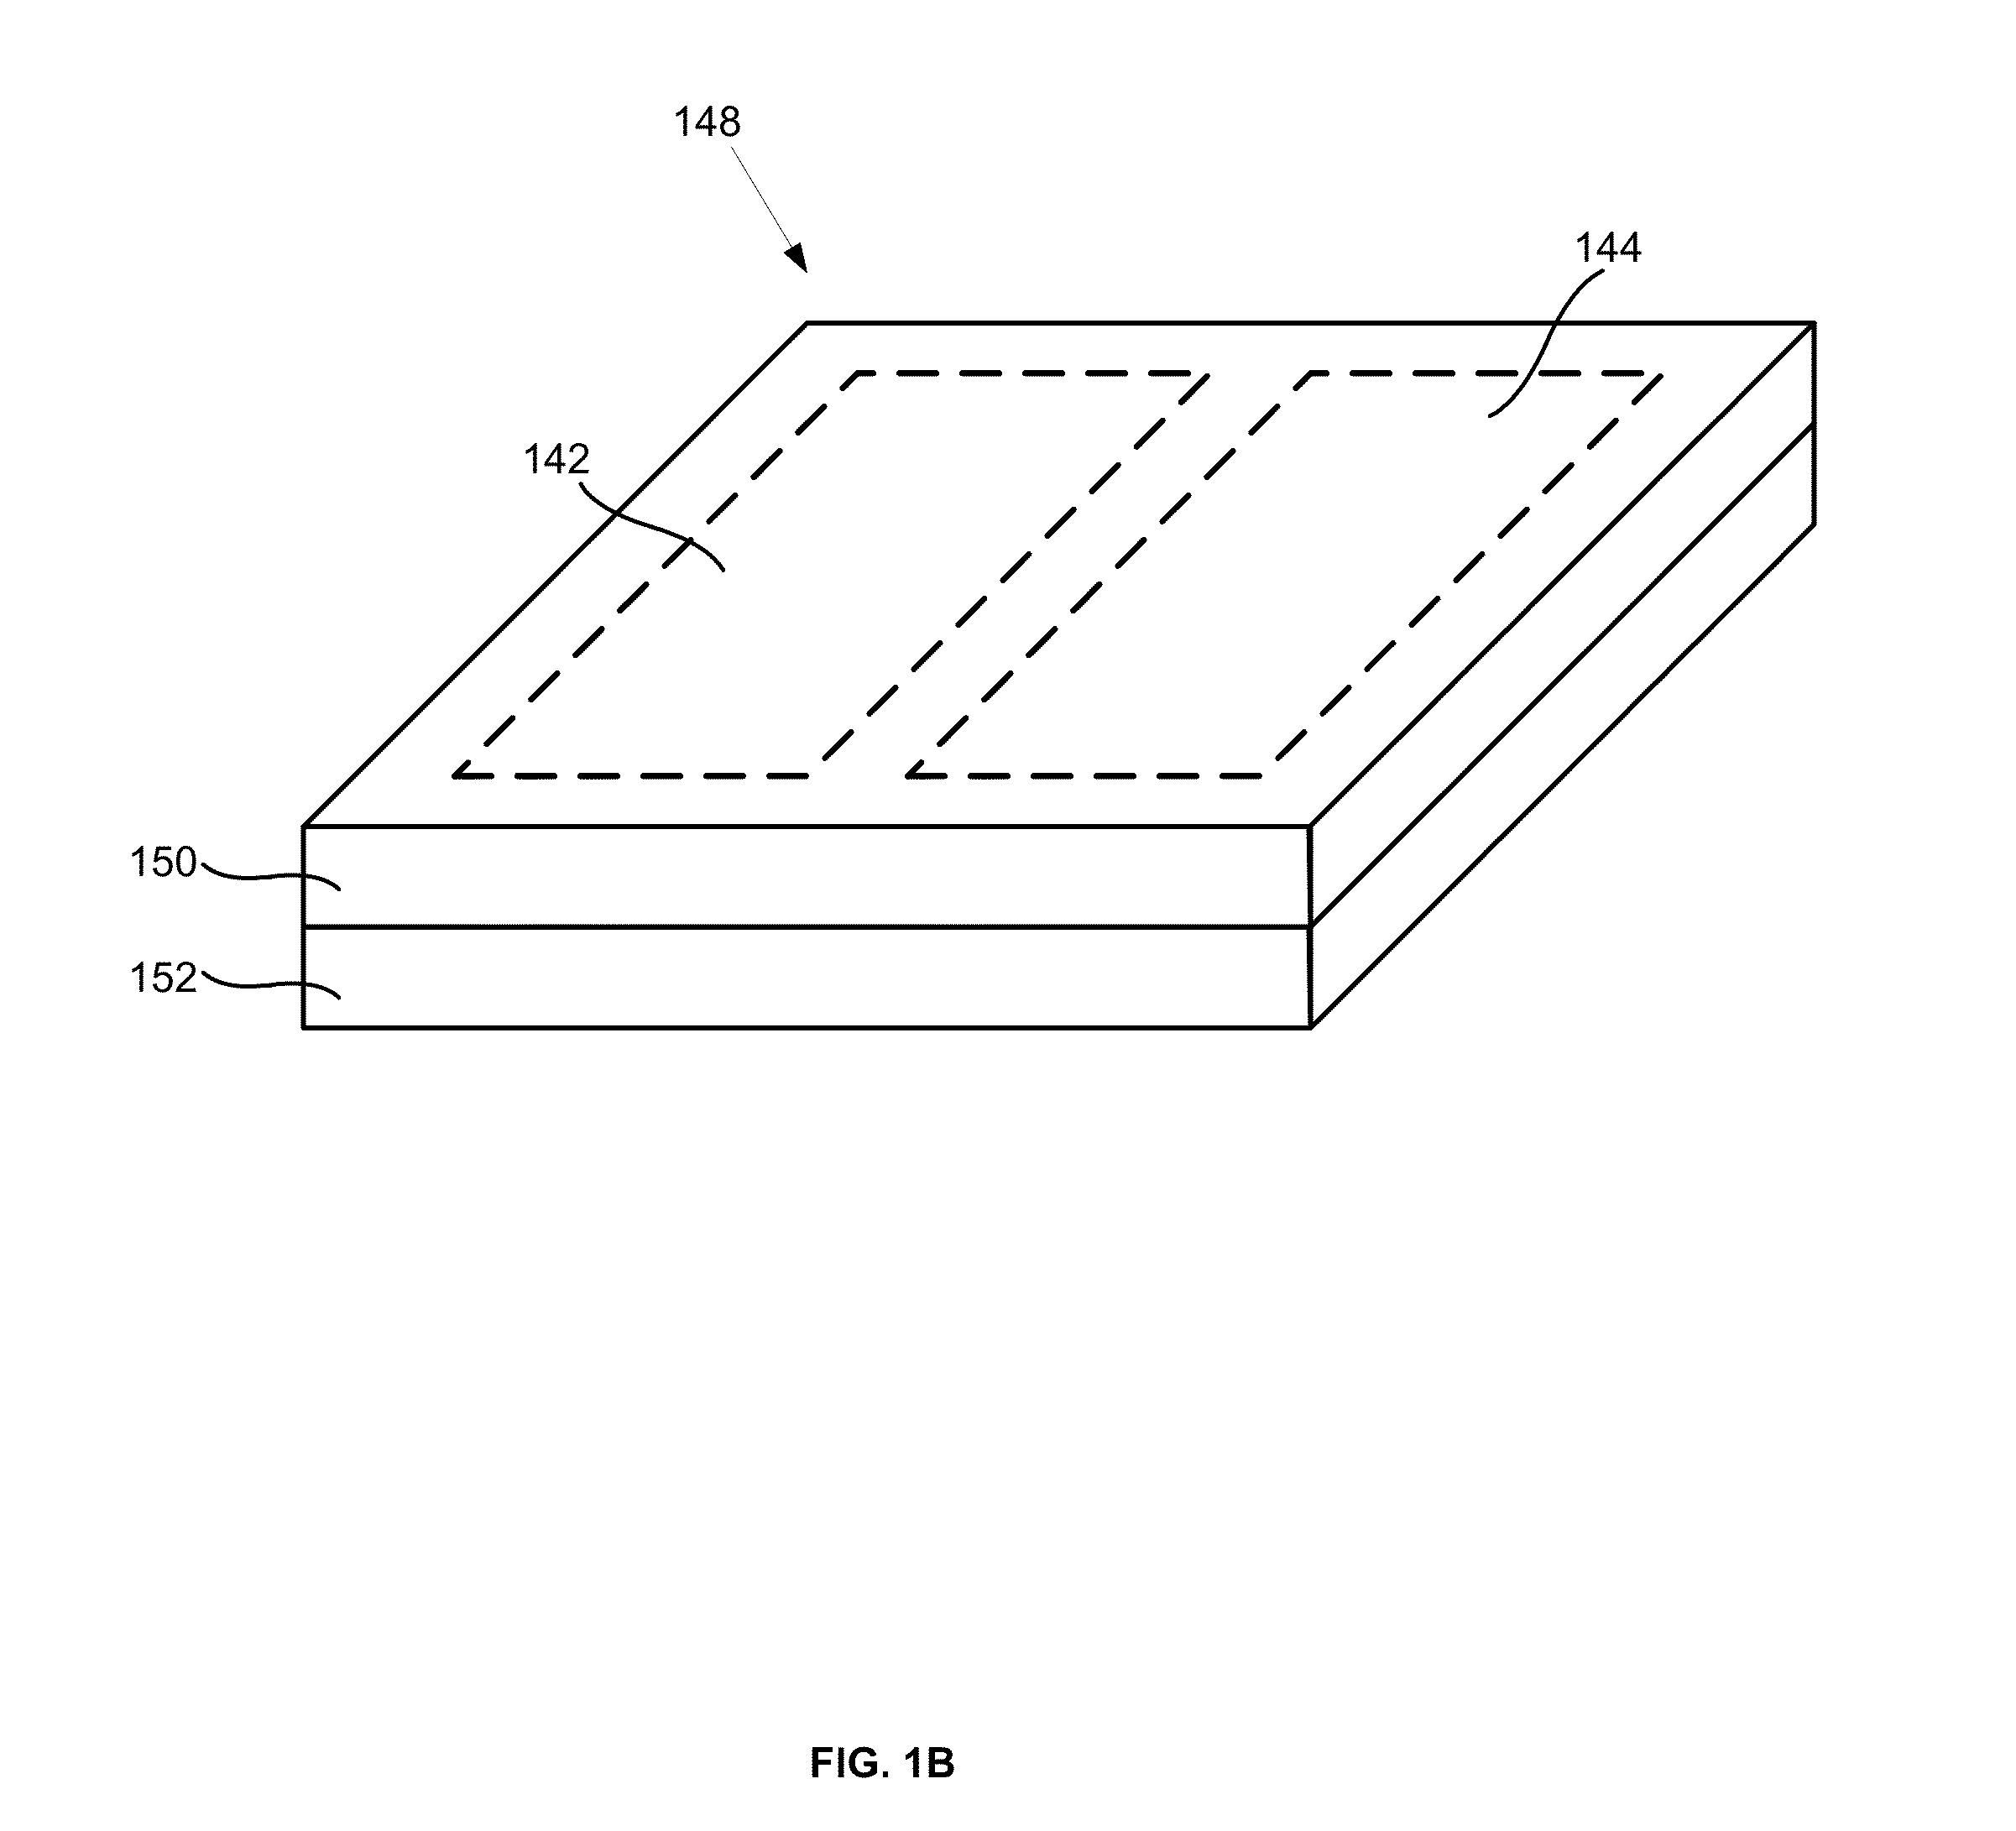 Systems, methods, apparatuses, and computer-readable storage media for collecting color information about an object undergoing a 3D scan